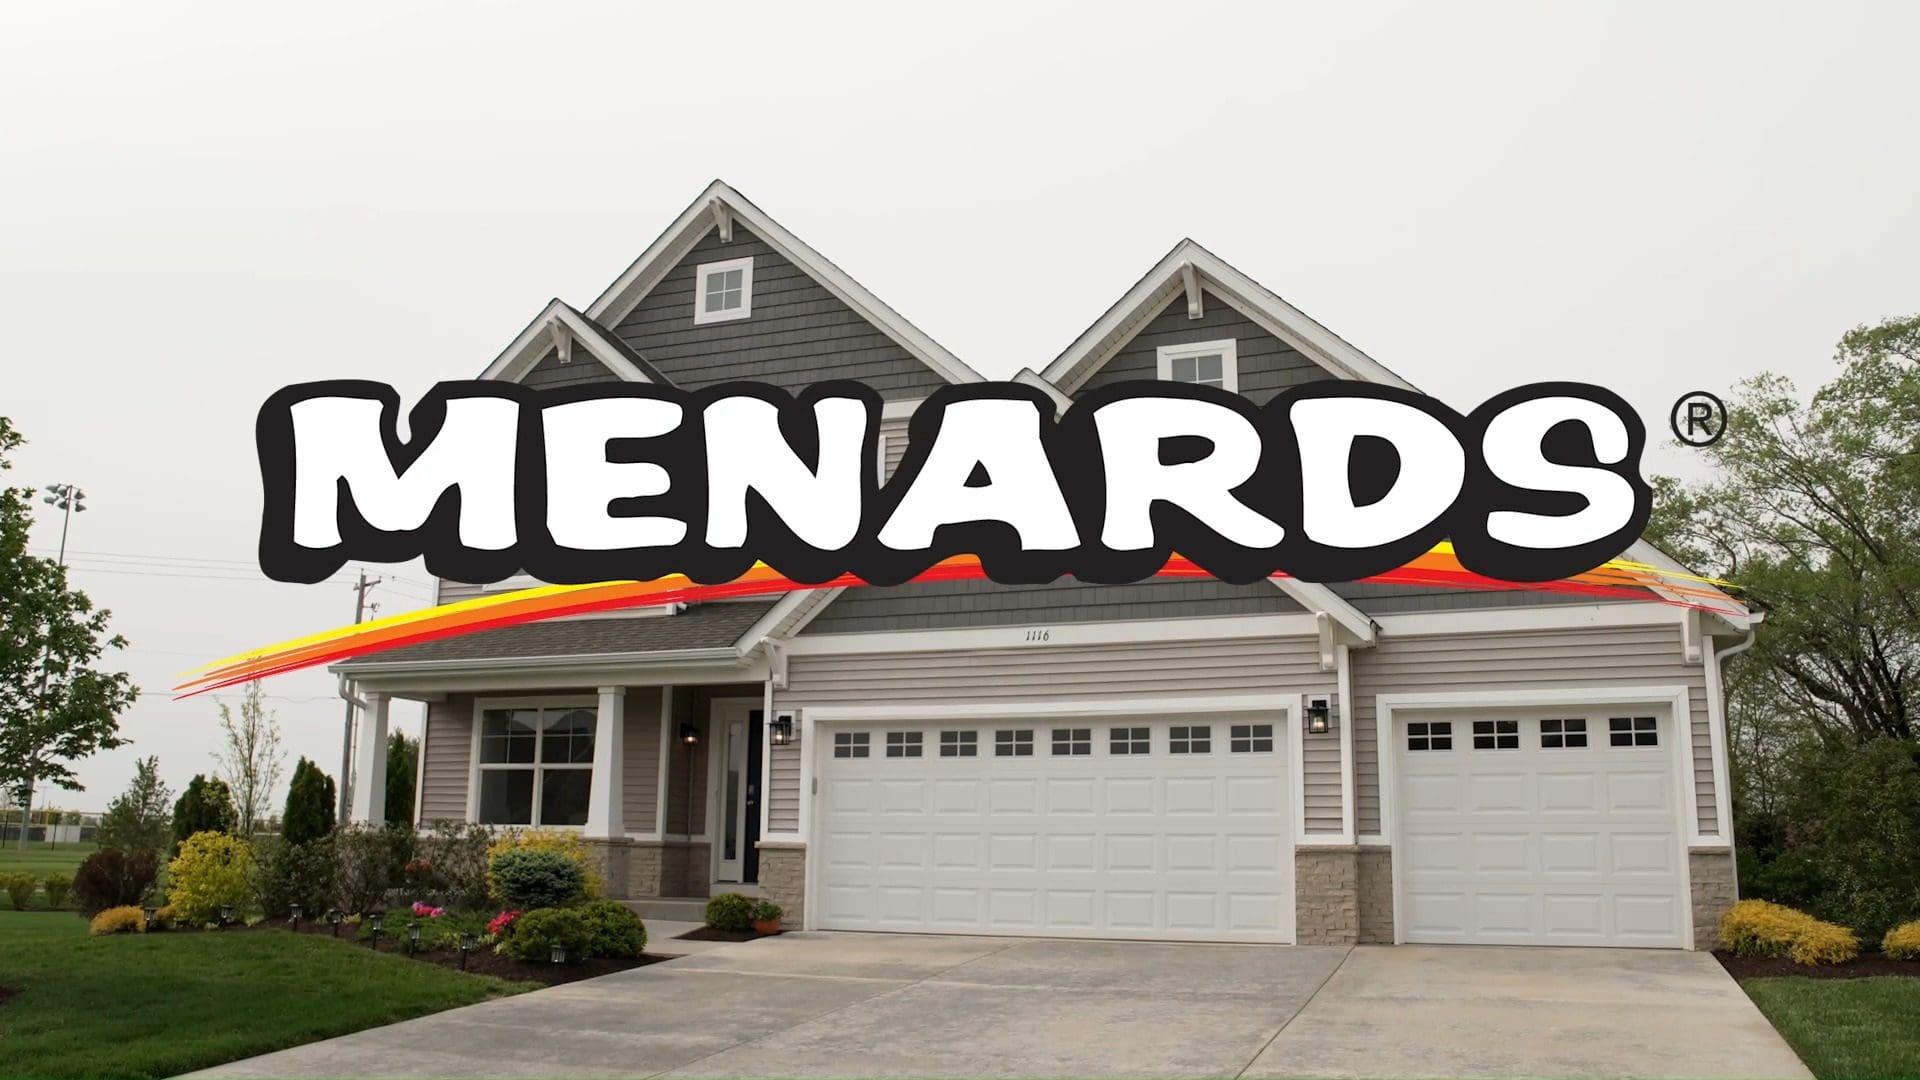 Menards -Find Your Style